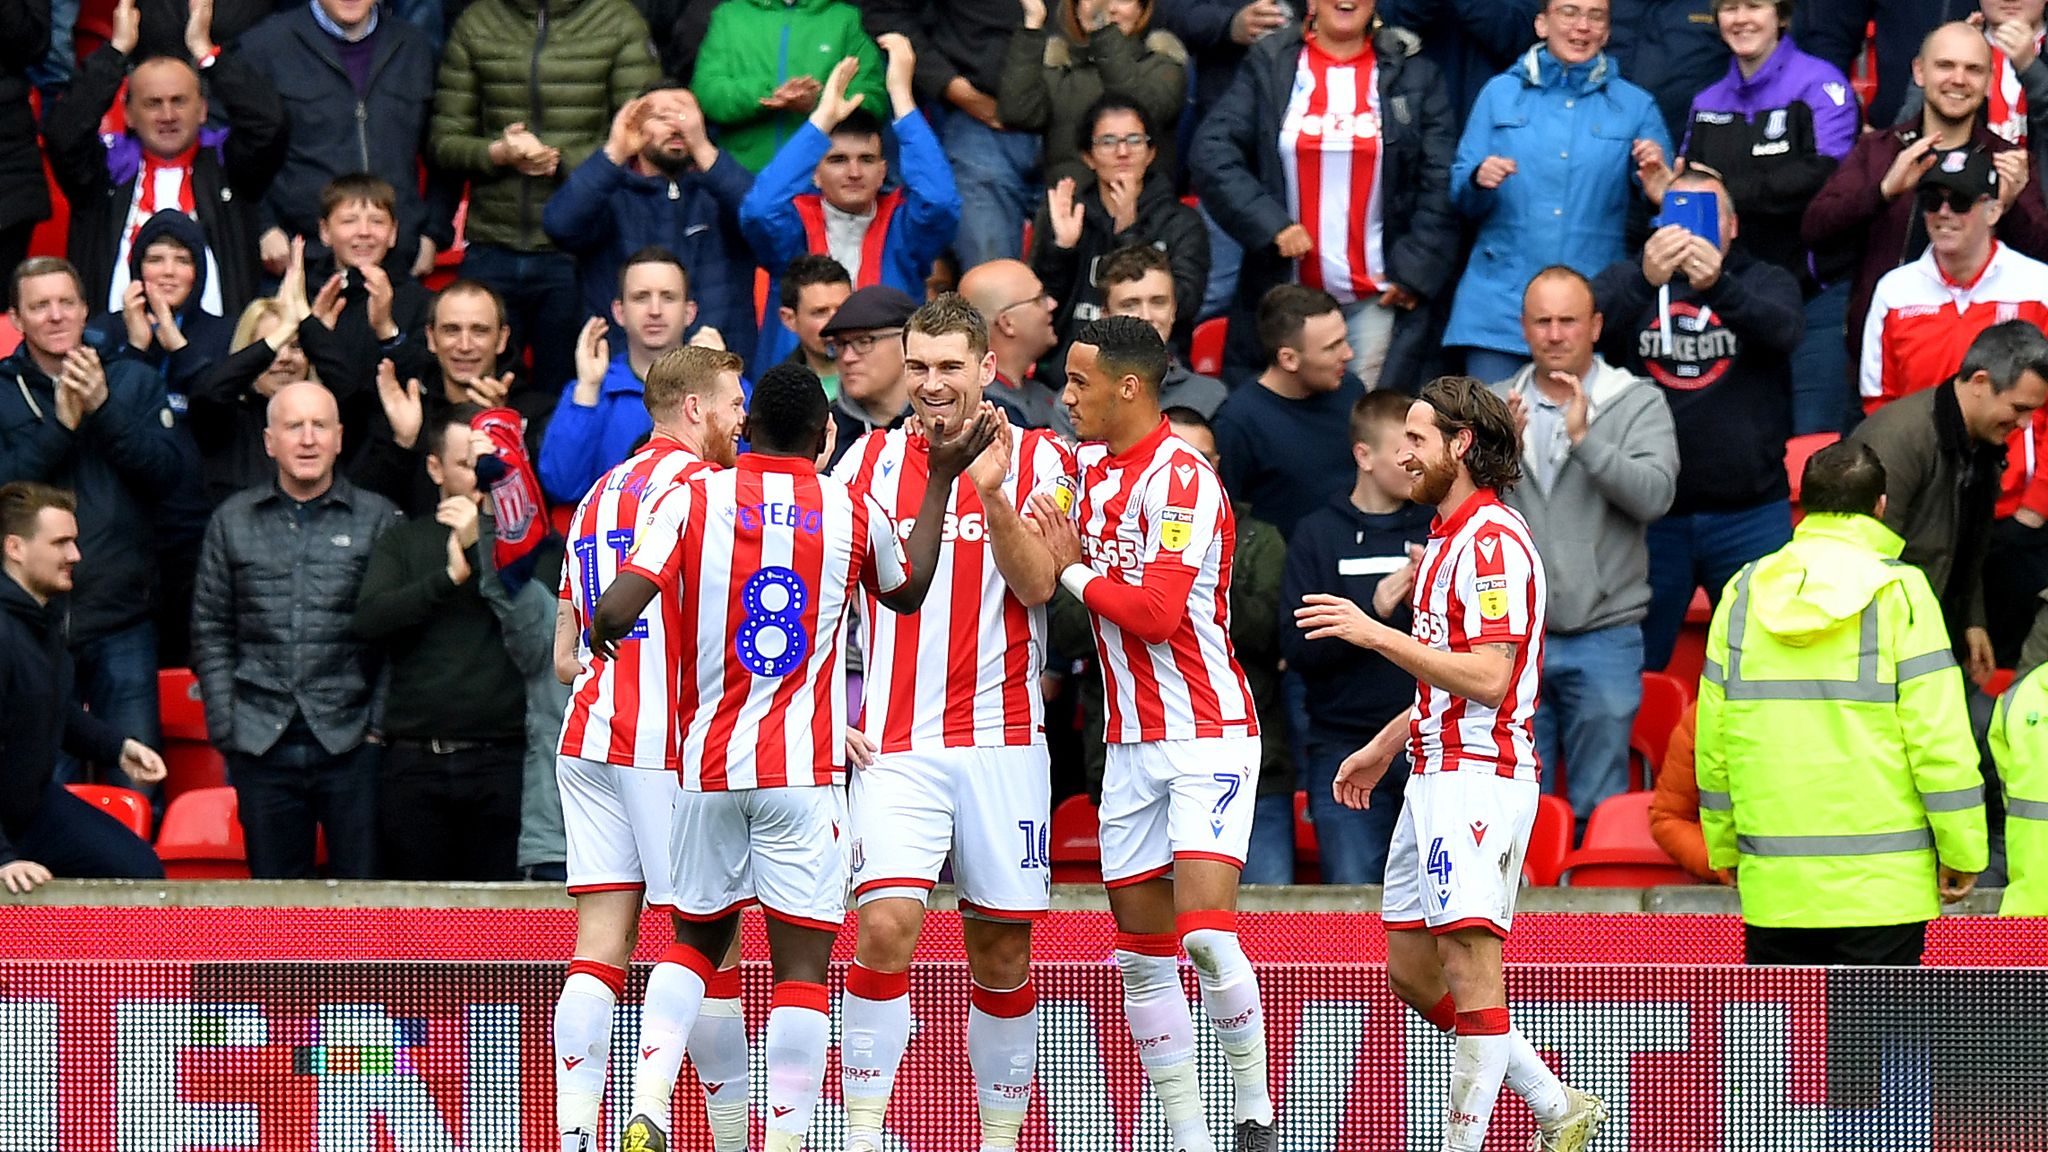 Stoke City FC - Championship fixtures to be revealed on Thursday, June 22